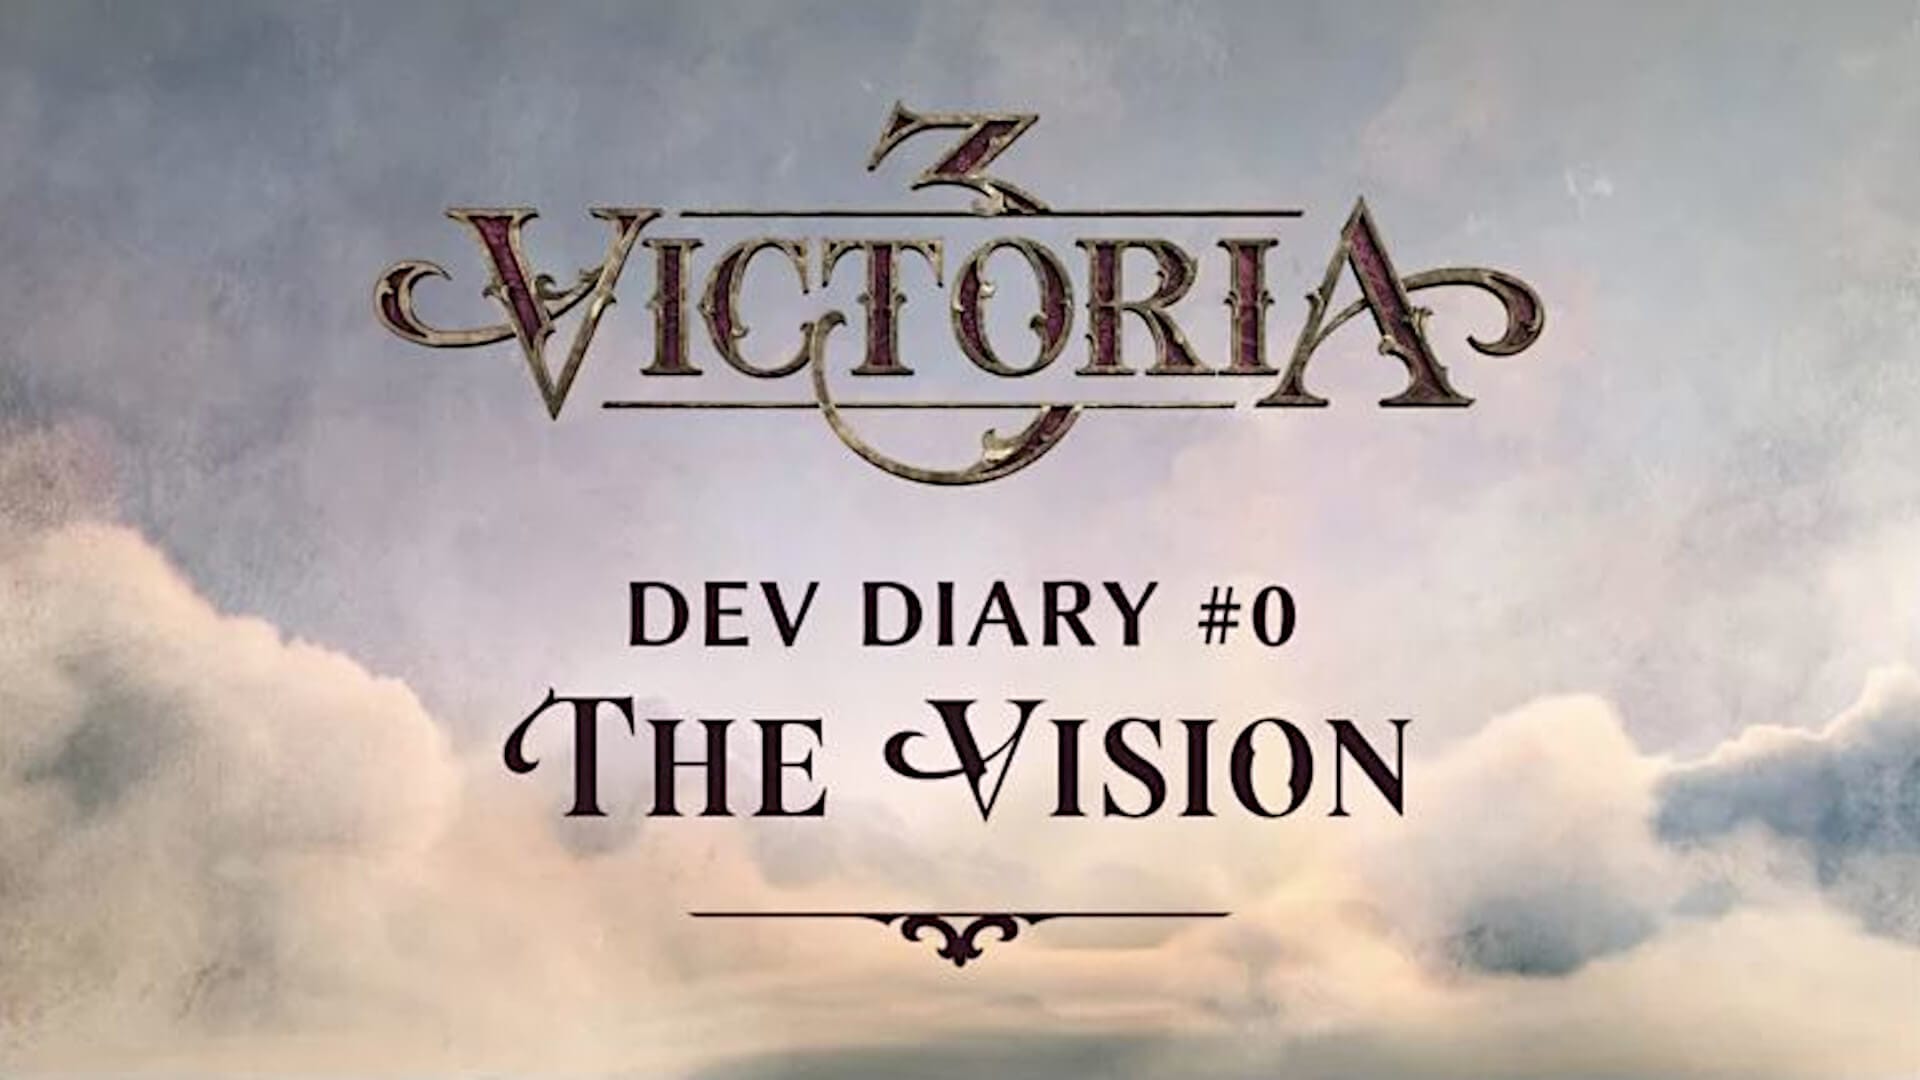 A leaked dev diary thumbnail for Victoria 3